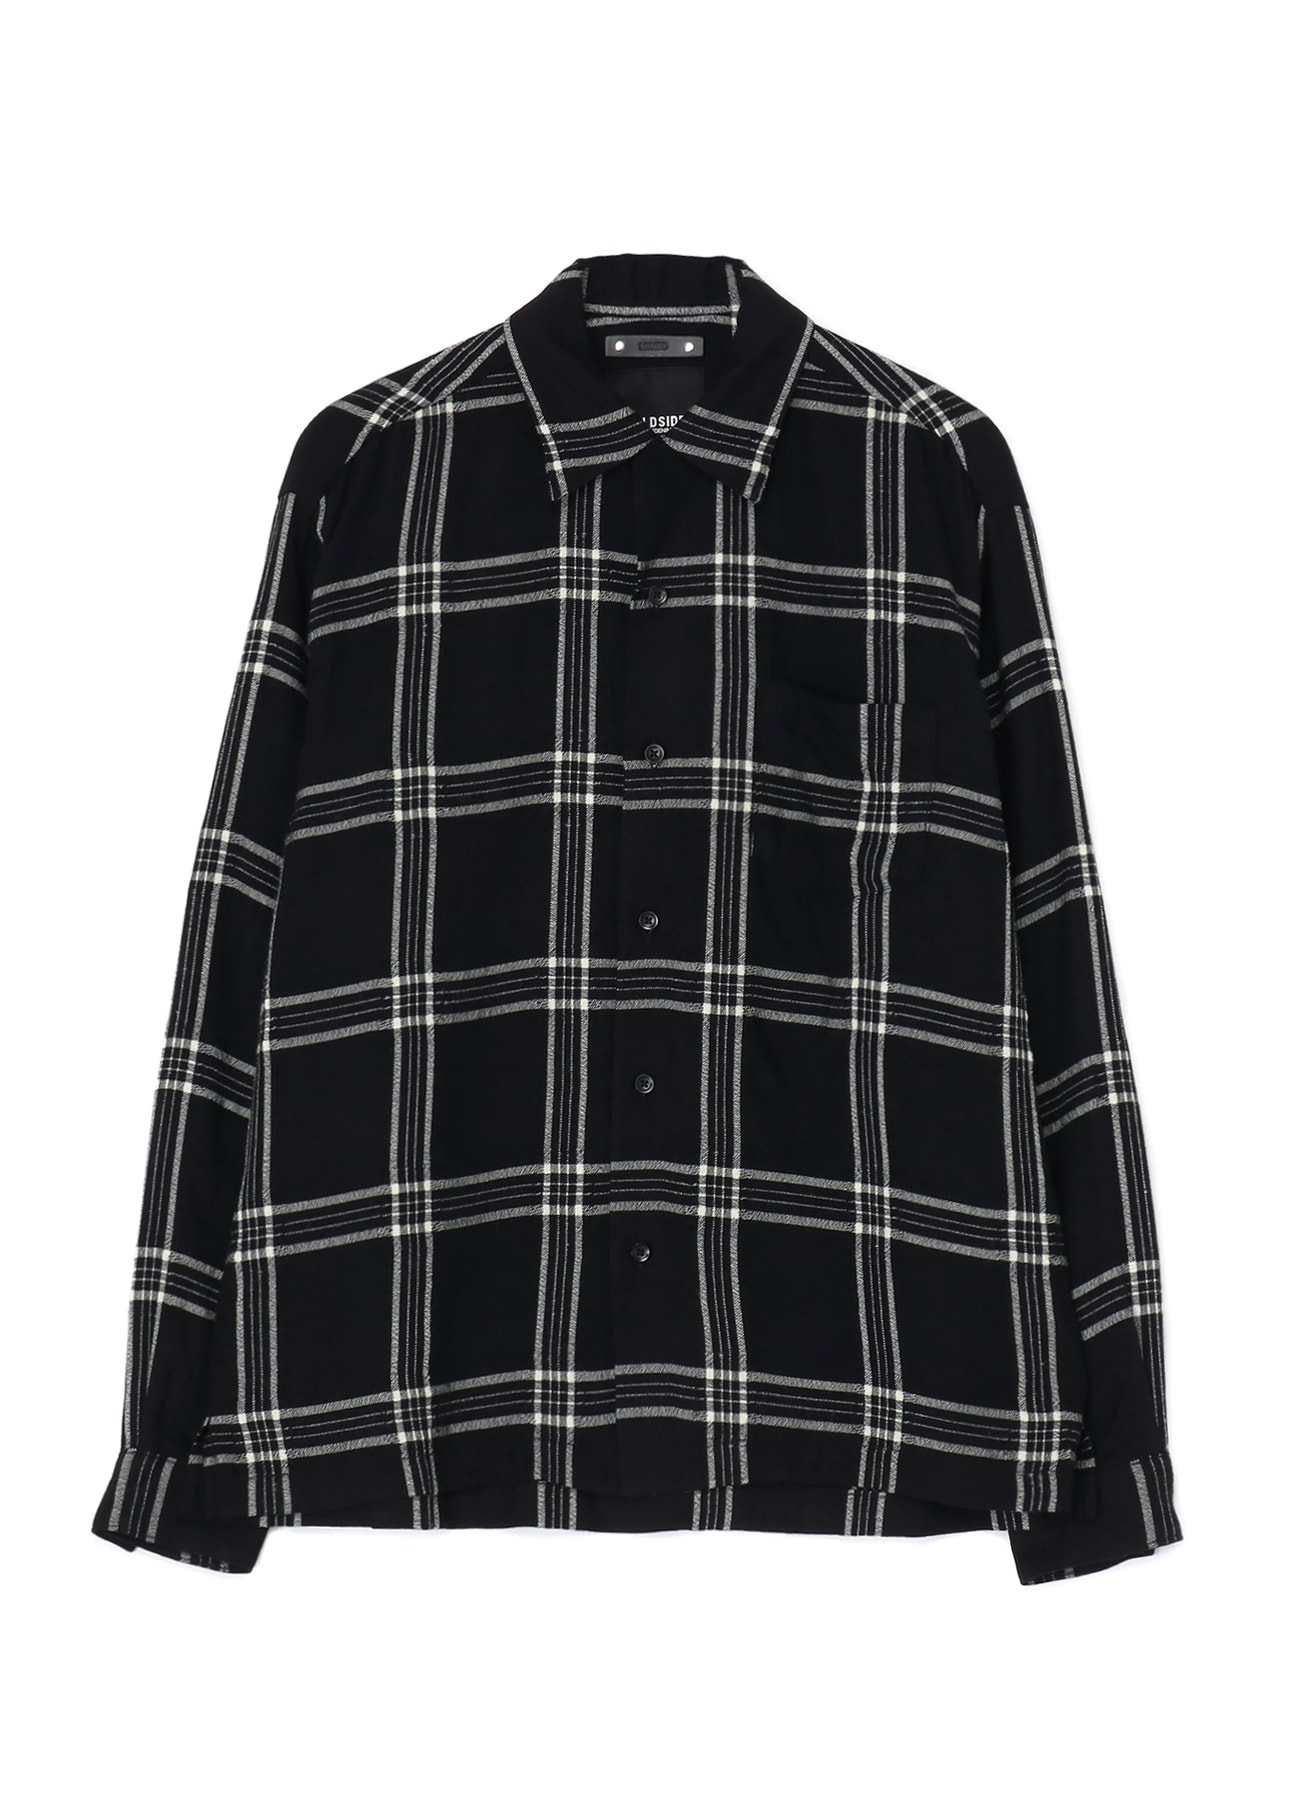 WILDSIDE×MINEDENIM R.Wool Flannel Check Embroidery Open Collar SH